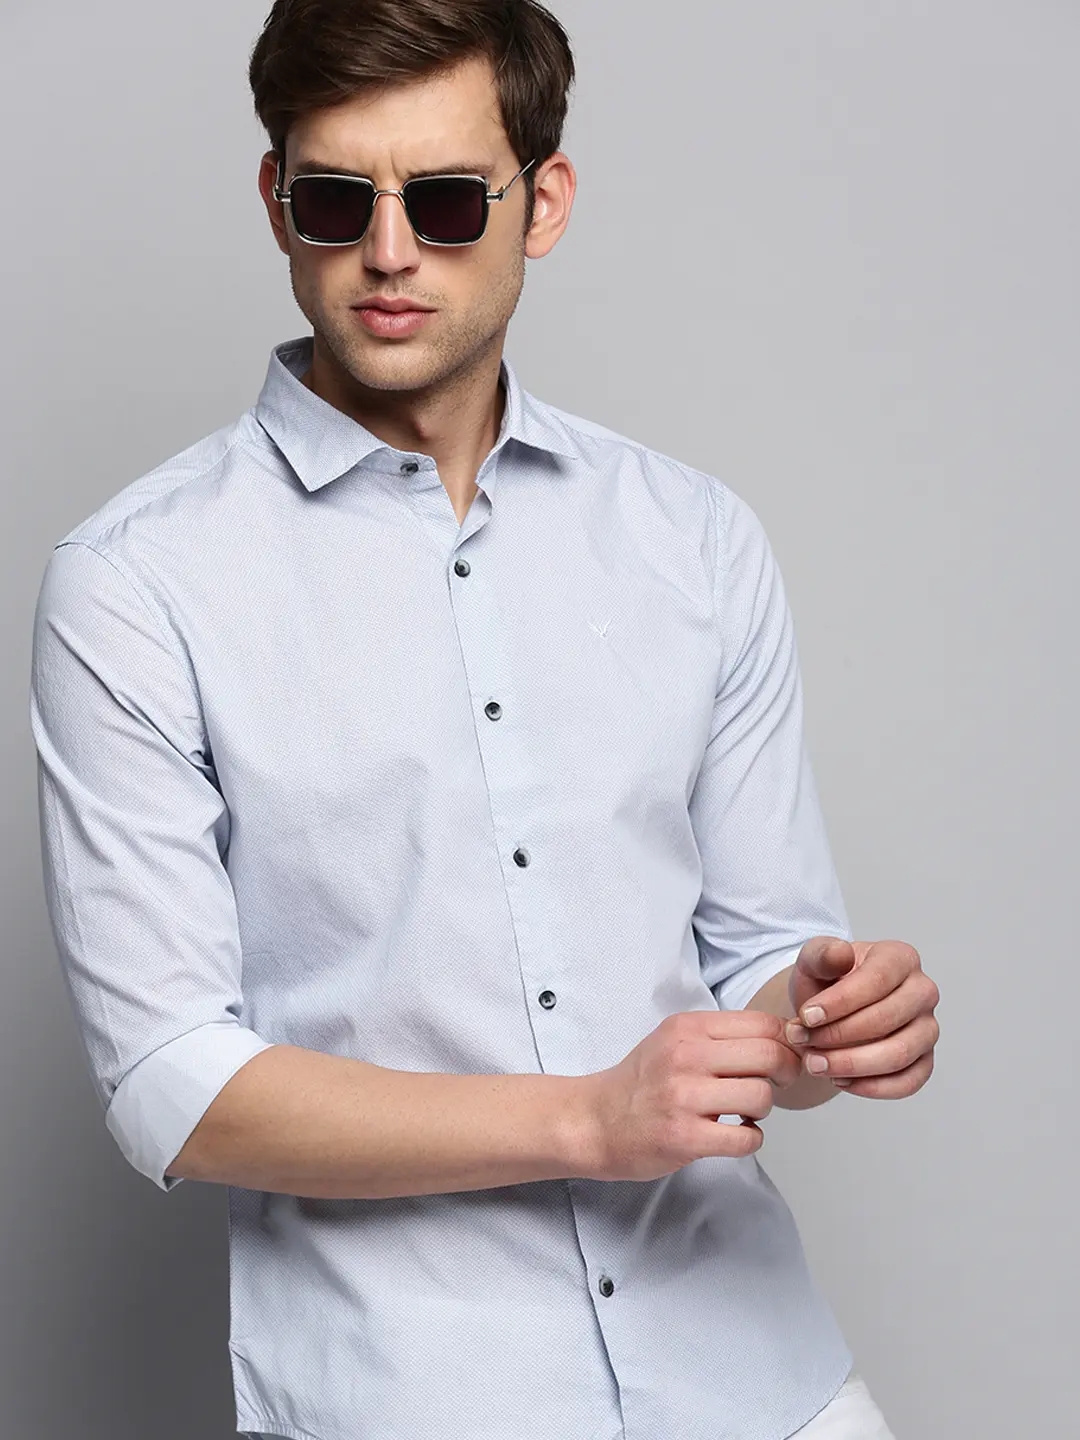 SHOWOFF Men's Spread Collar Printed White Classic Shirt